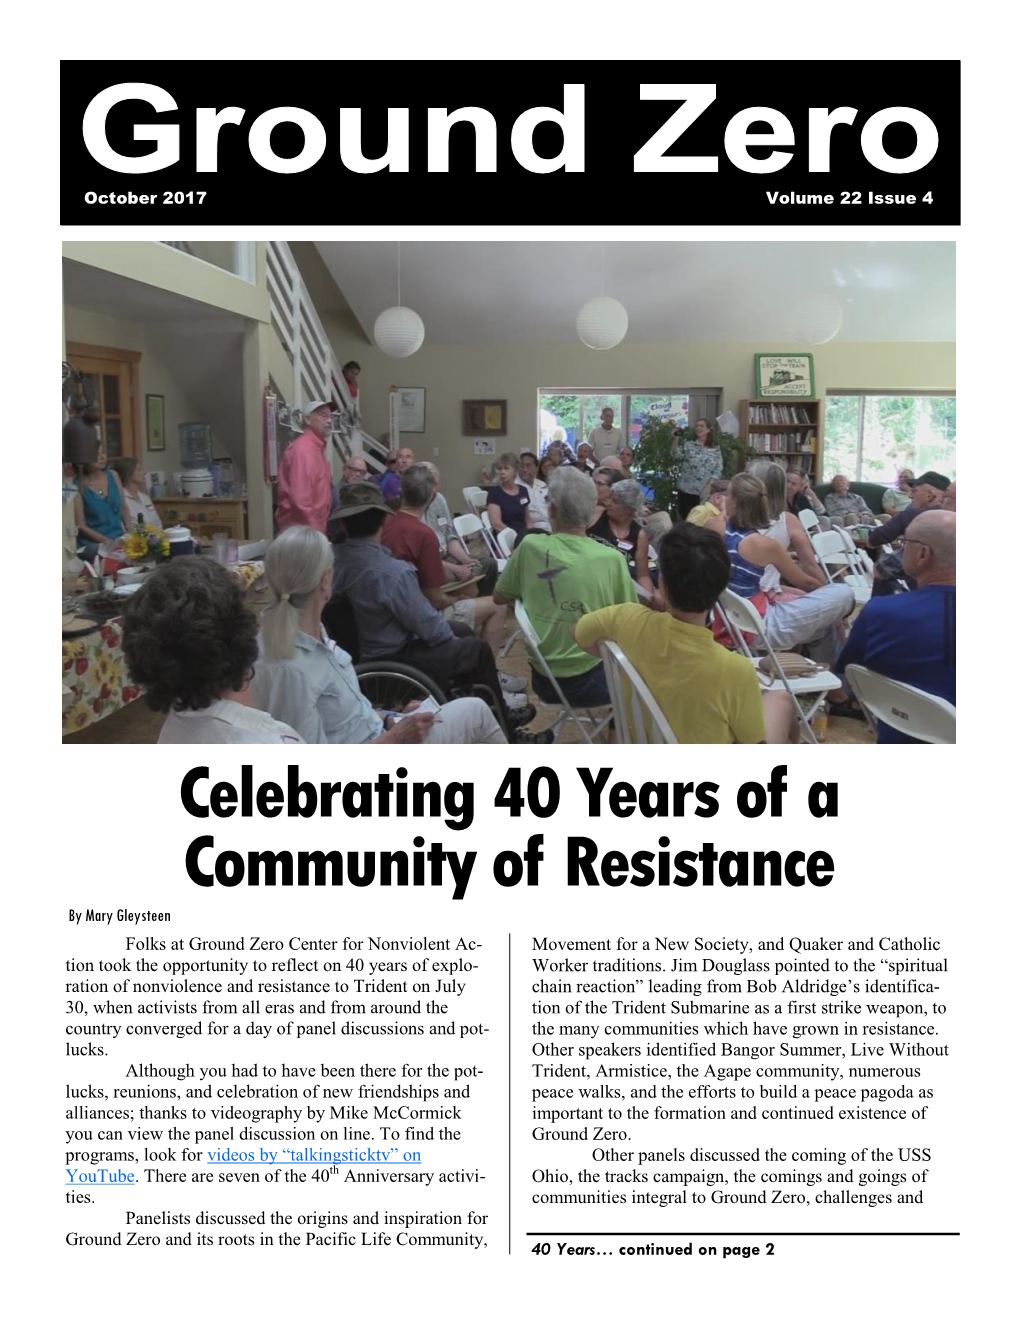 Celebrating 40 Years of a Community of Resistance